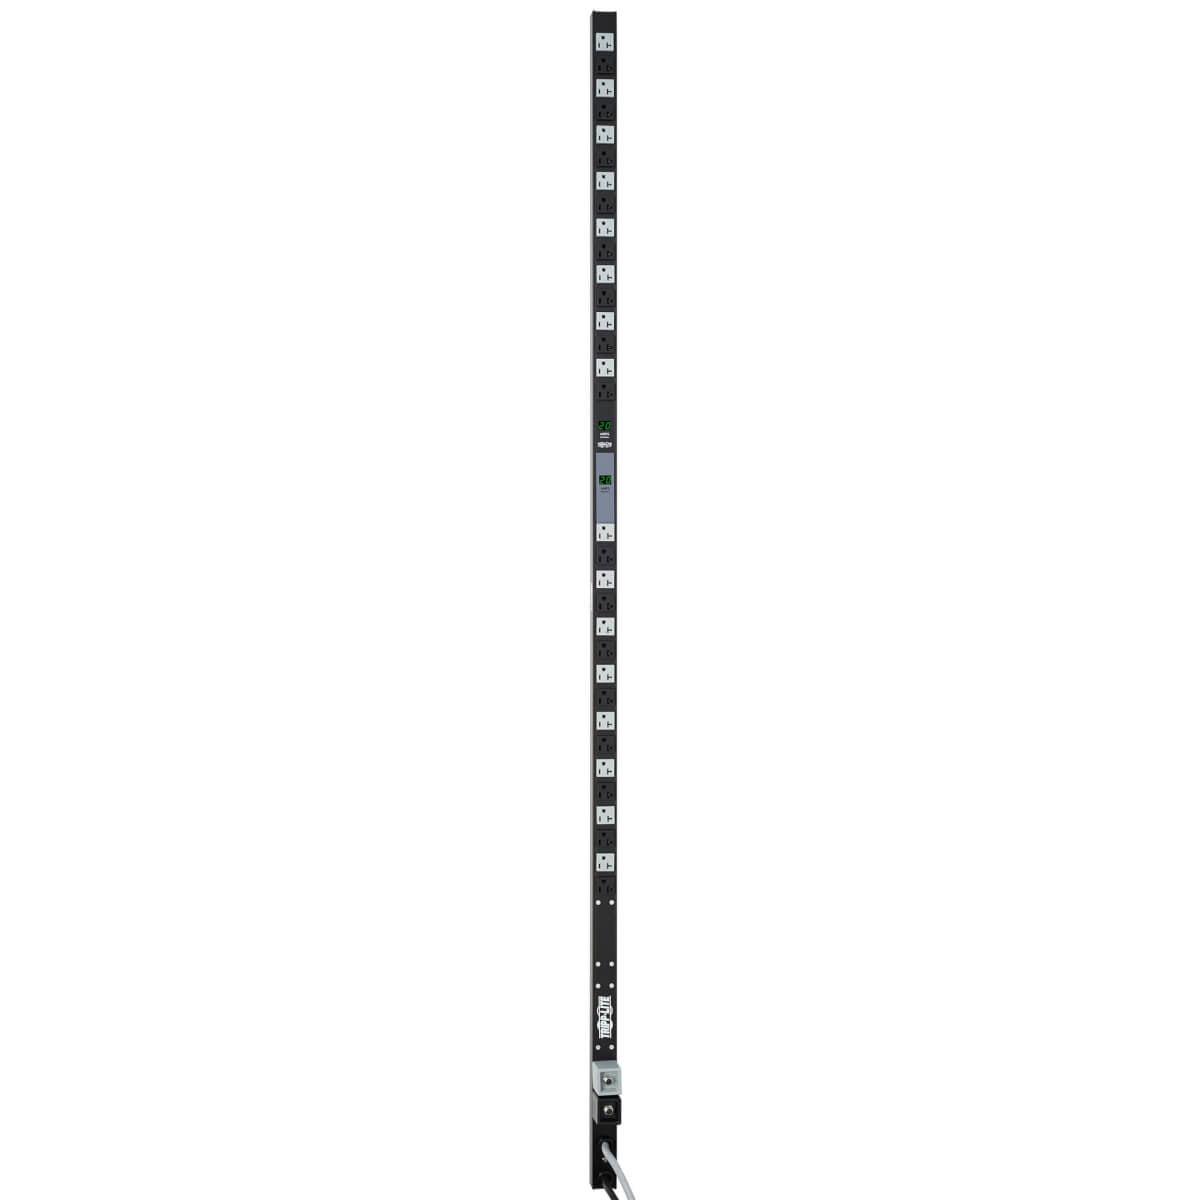 Tripp Lite 3.8Kw Single-Phase Metered Pdu, Dual Circuit, 120V Outlets (32 5-15/20R), L5-20P/5-20P, 10Ft Cord, 0U Vertical